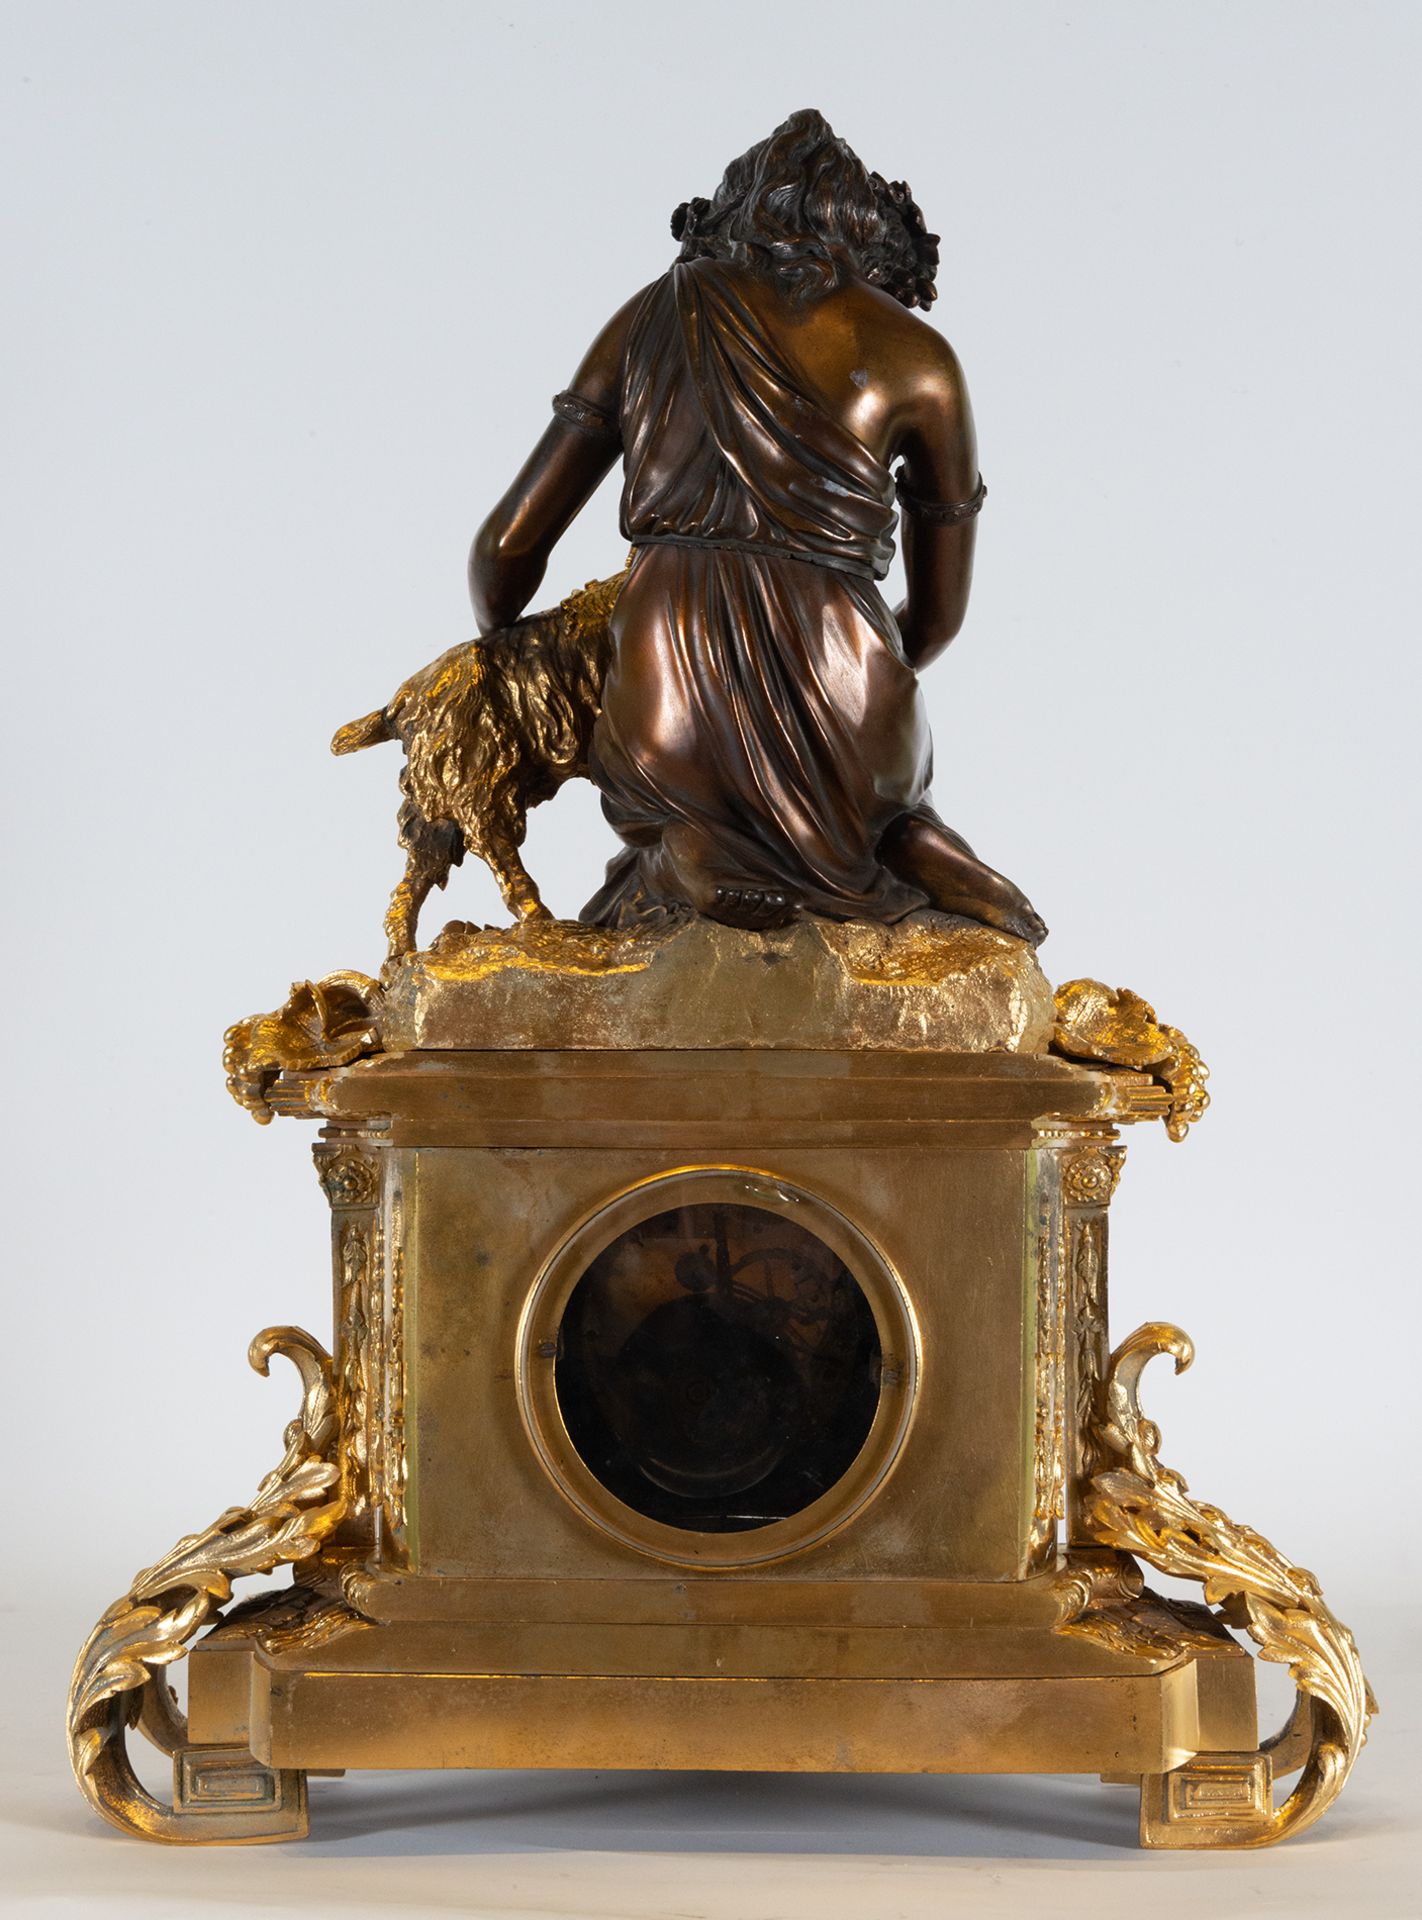 Exceptional Large French Tabletop Clock depicting Bacchus with Ram, Paris Machinery, circa 19th cent - Image 6 of 7